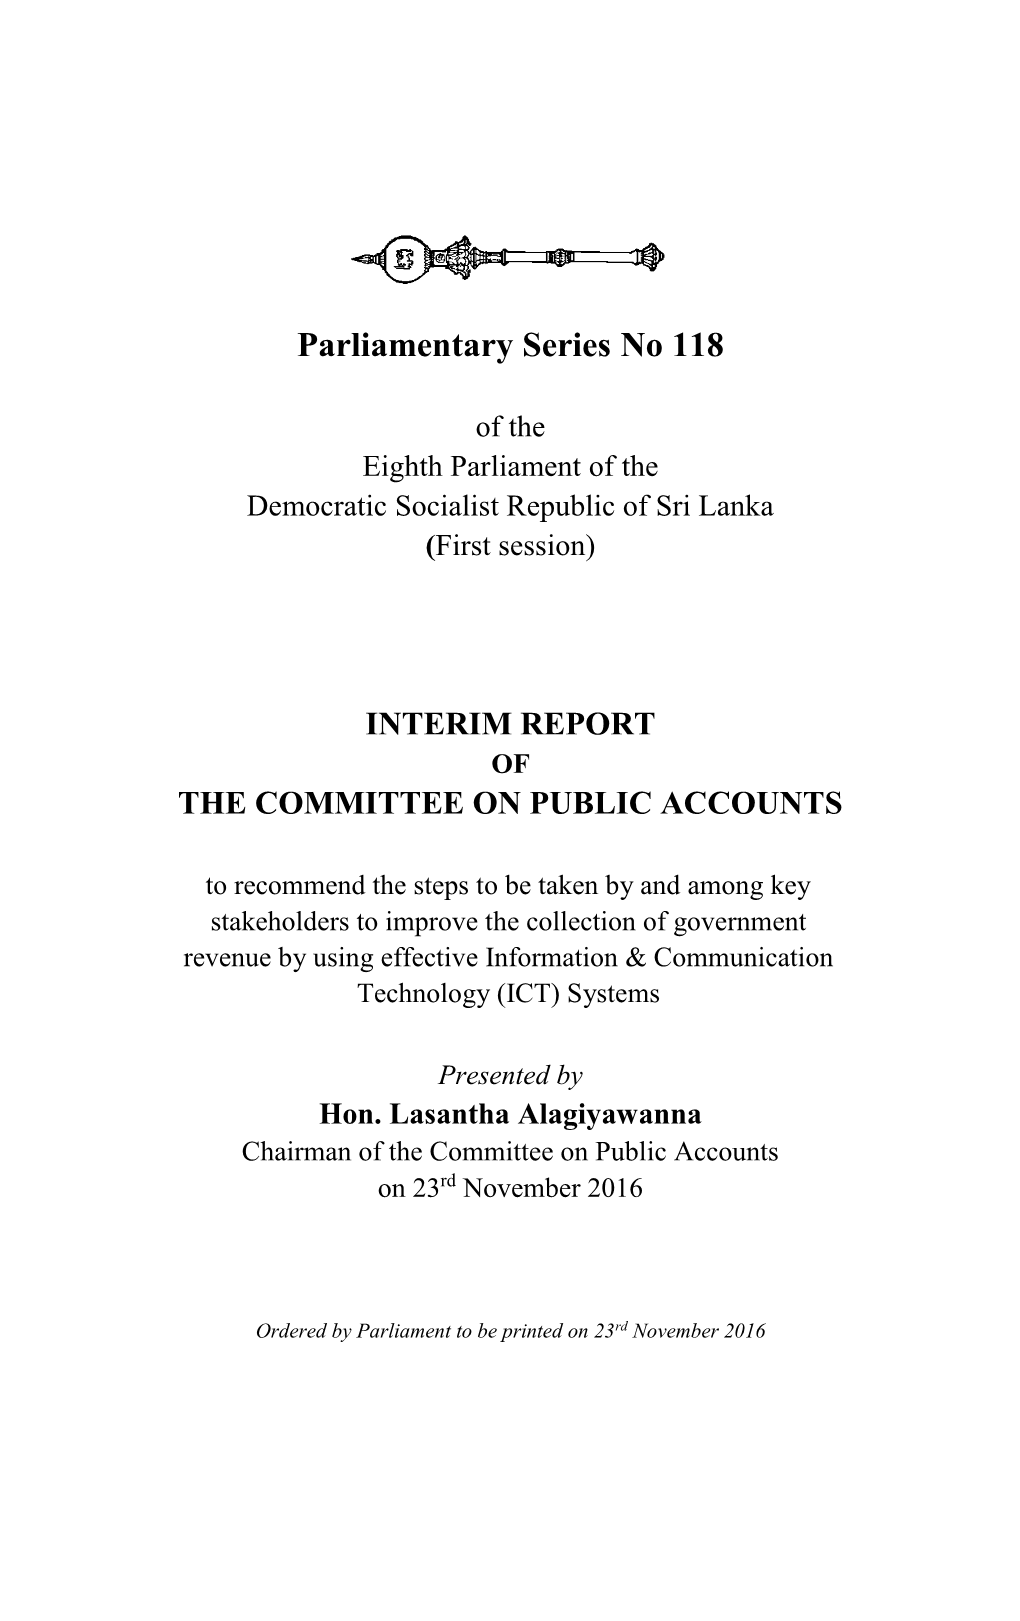 Interim Report of the Committee on Public Accounts To